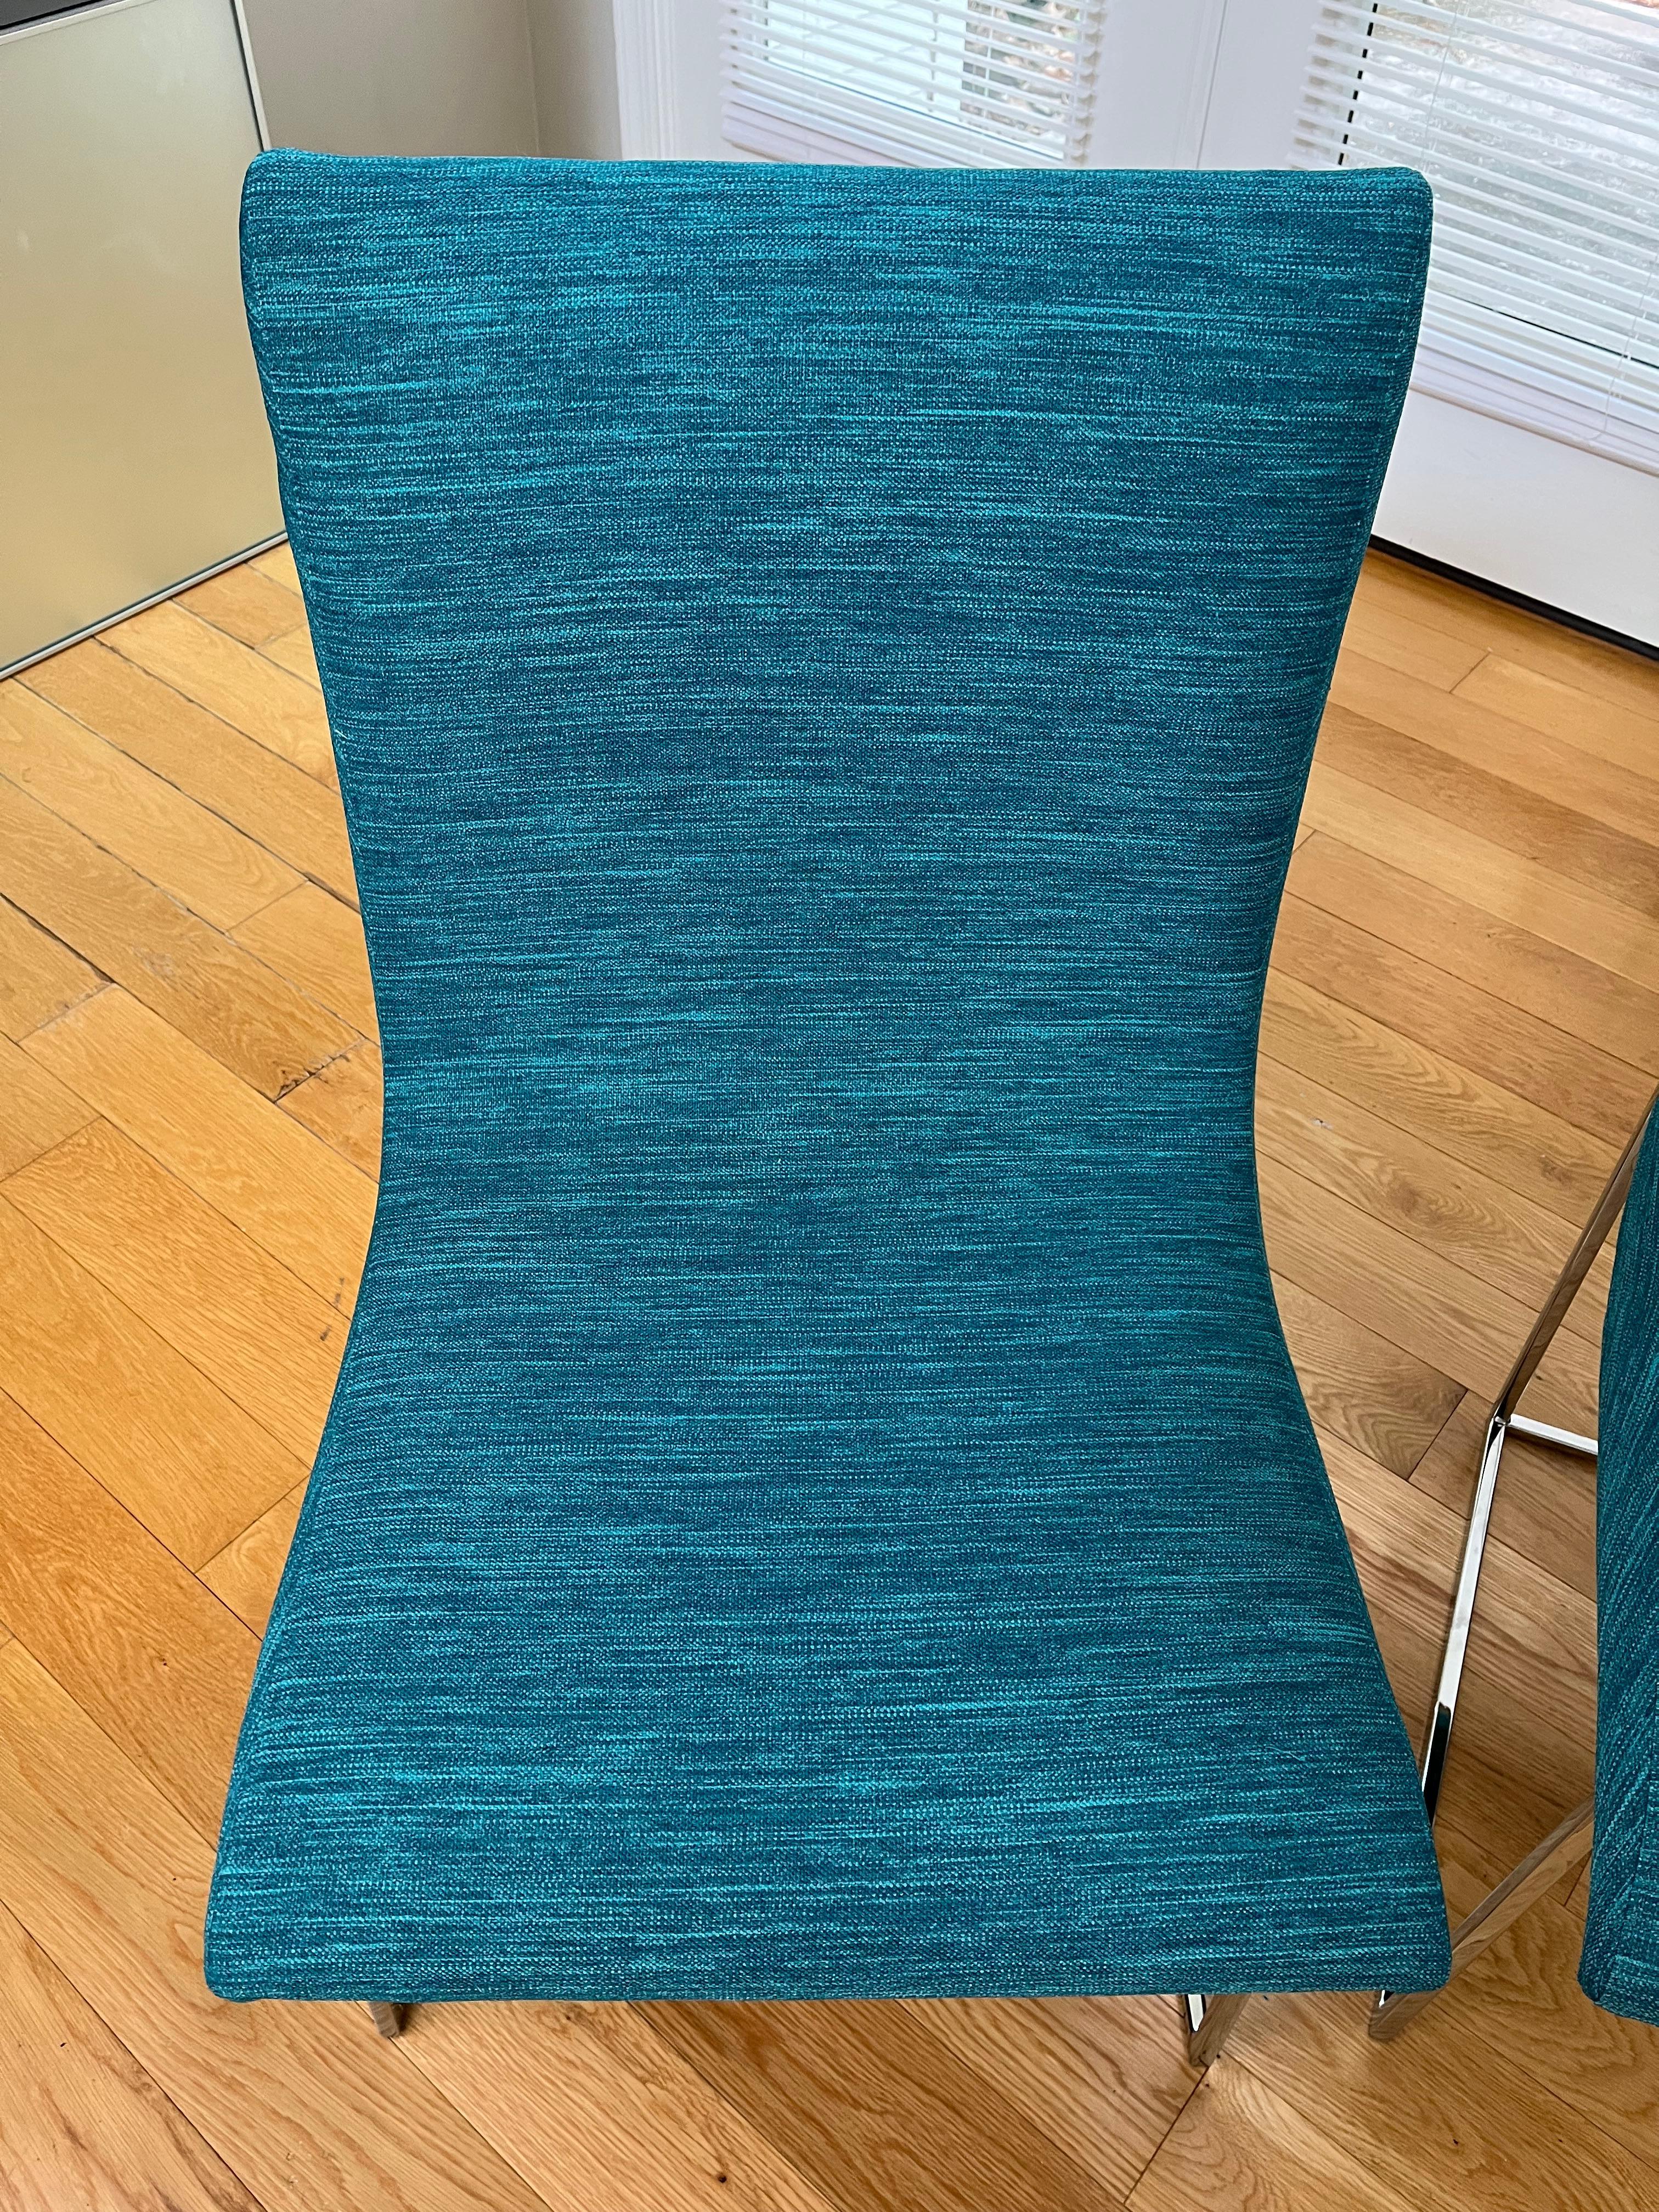 Mid-Century Modern Scoop Dining Chairs by Milo Baughman for Thayer Coggin in Caribbean 'Aqua' Color For Sale